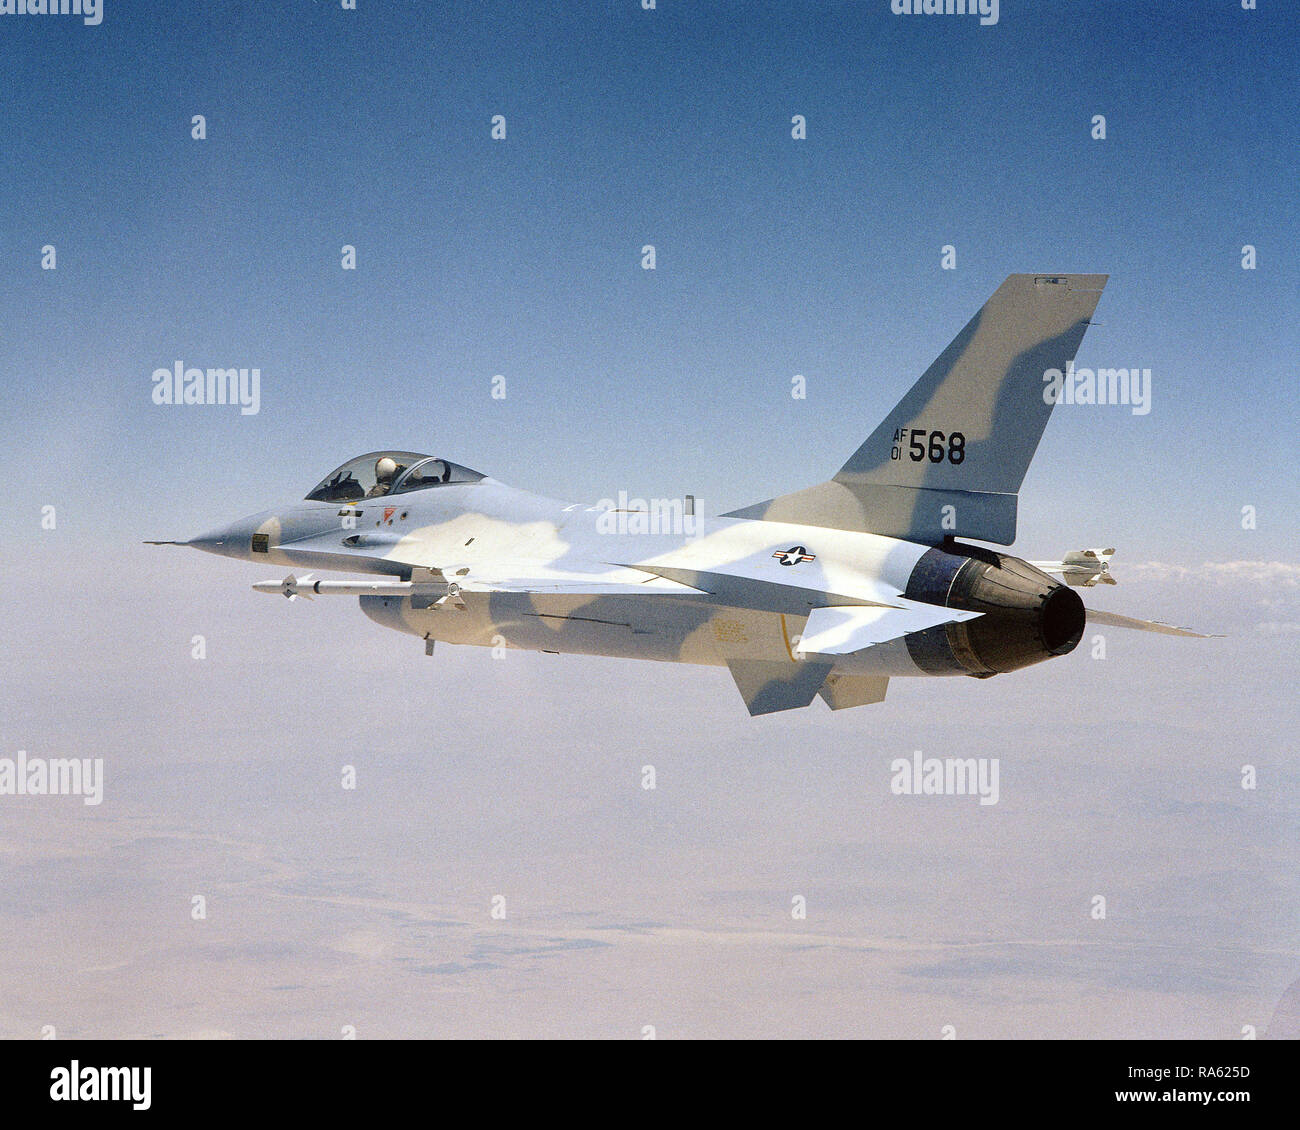 1974 - An air to air left side view of a YF-16 Fighting Falcon aircraft armed with AIM-9 Sidewinder missiles on the wing tips. Stock Photo